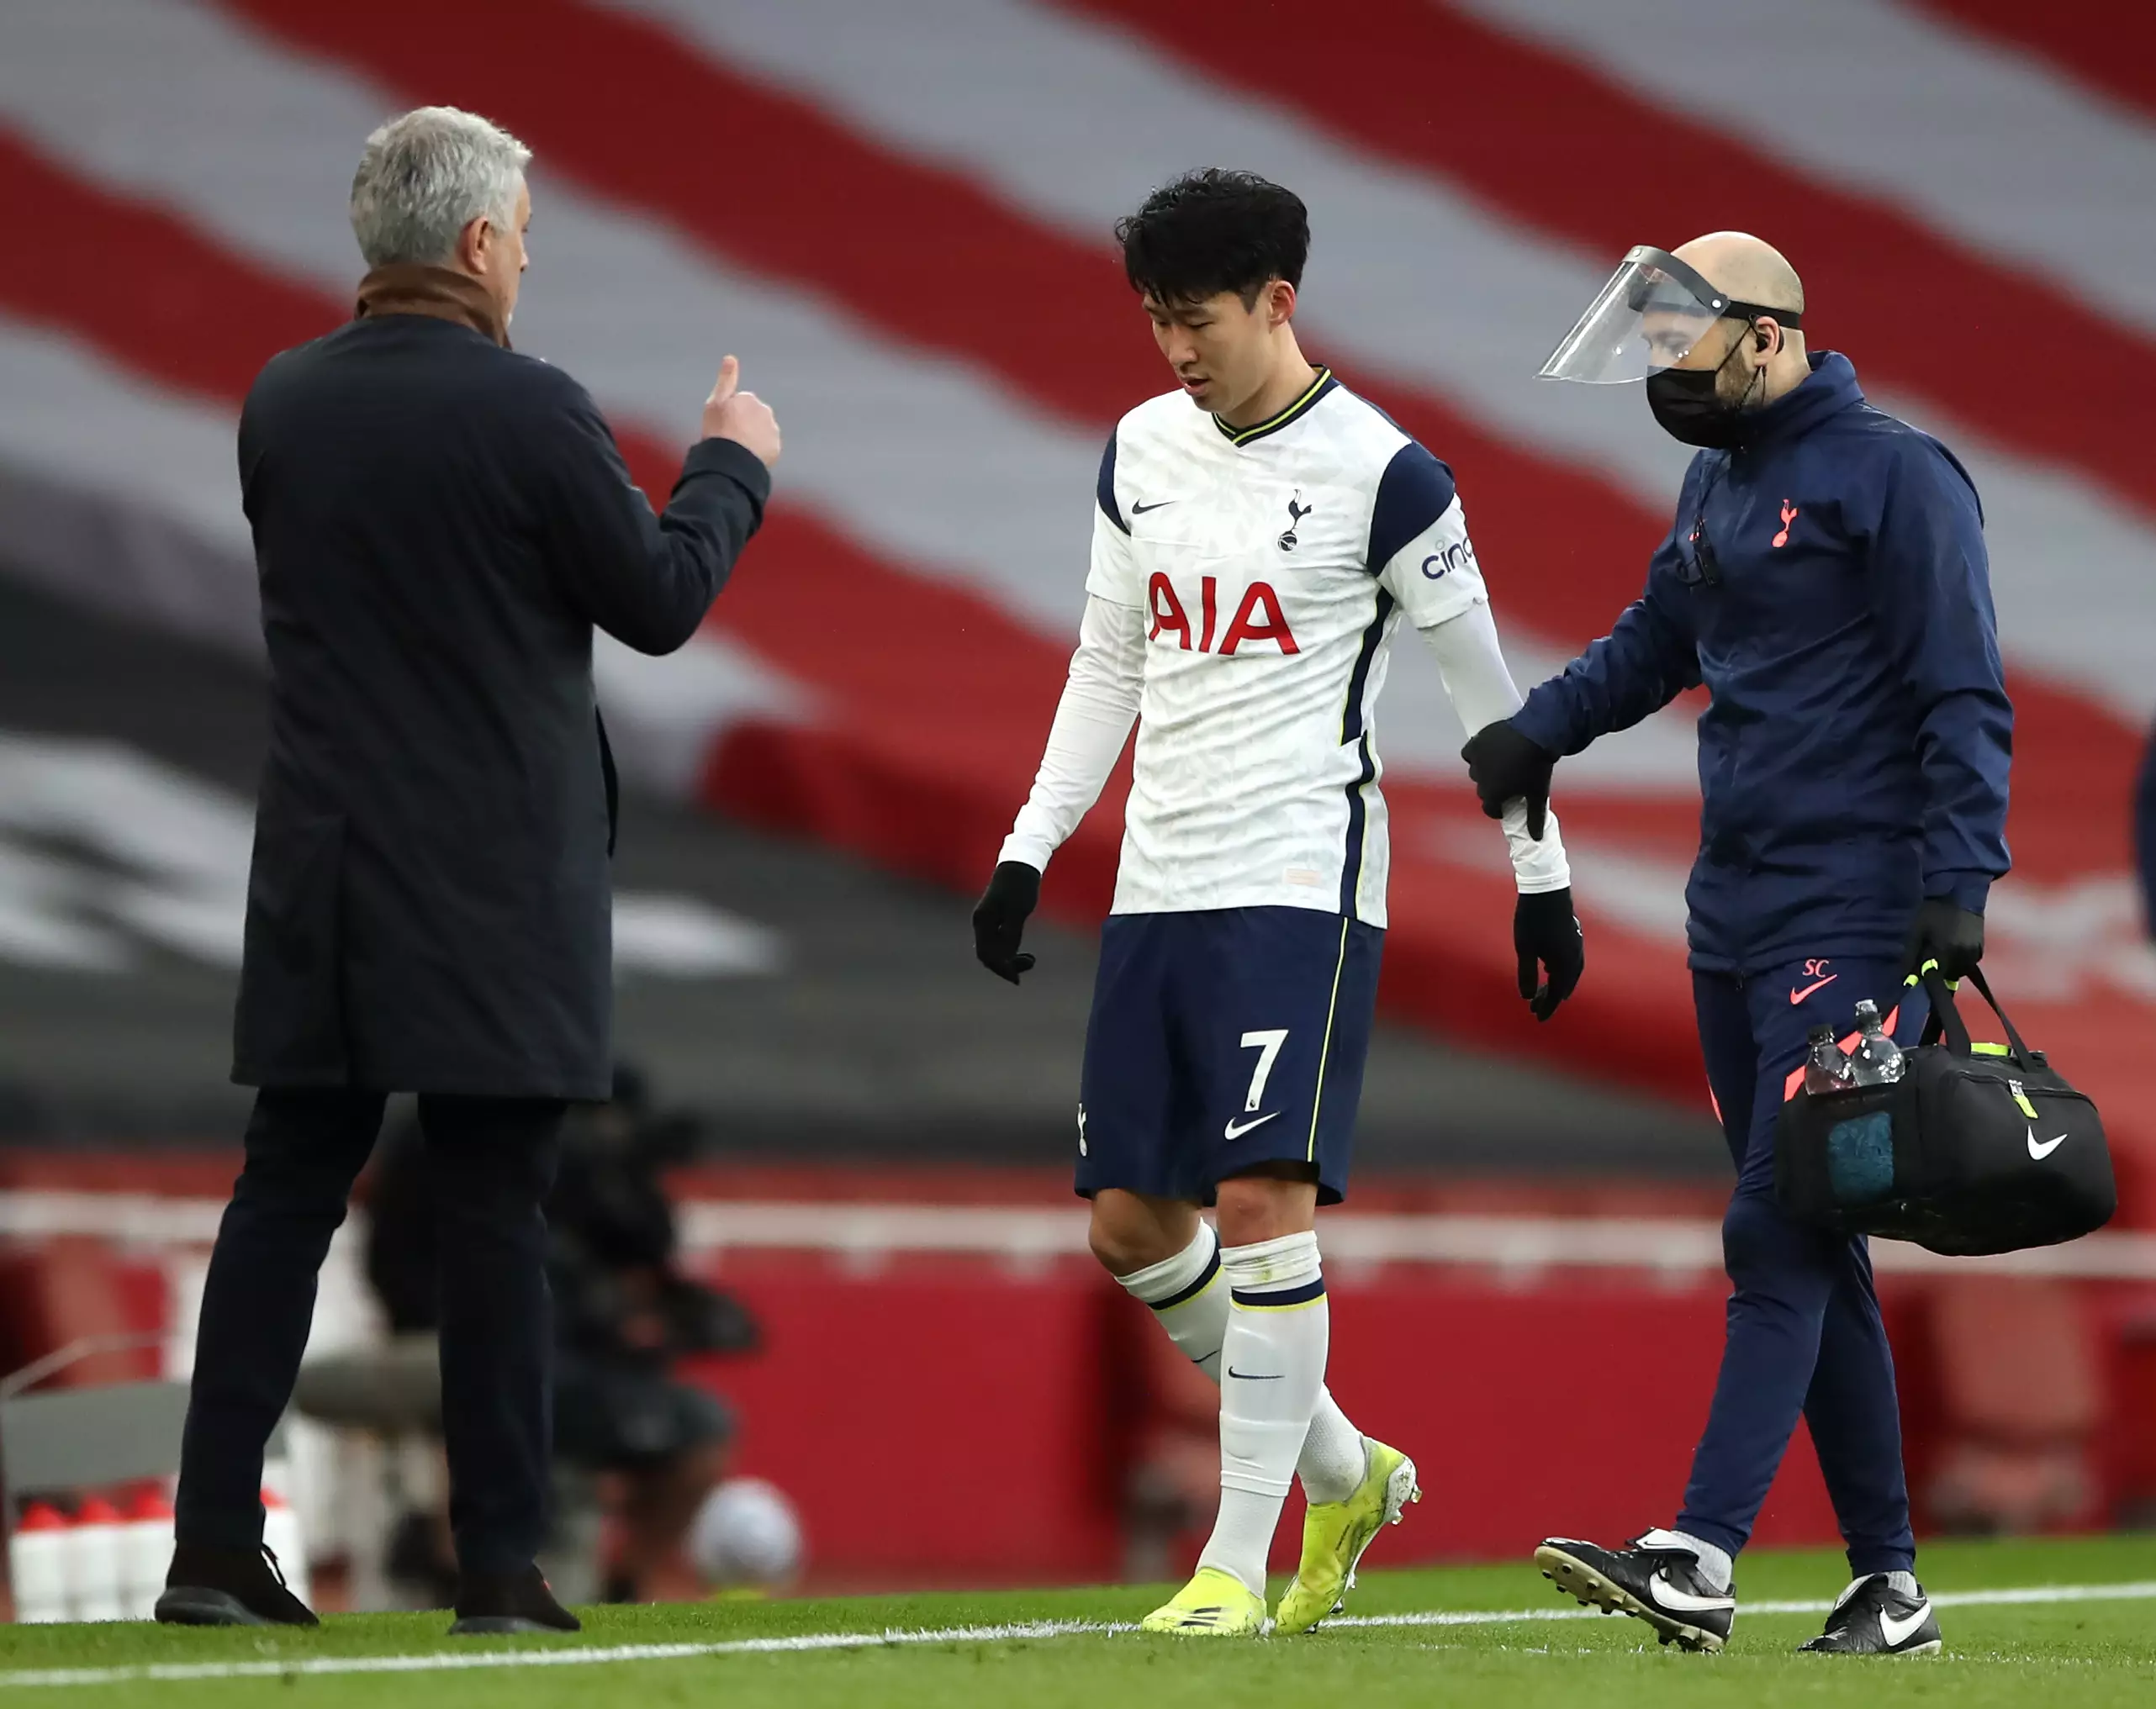 Son limps off injured. Image: PA Images